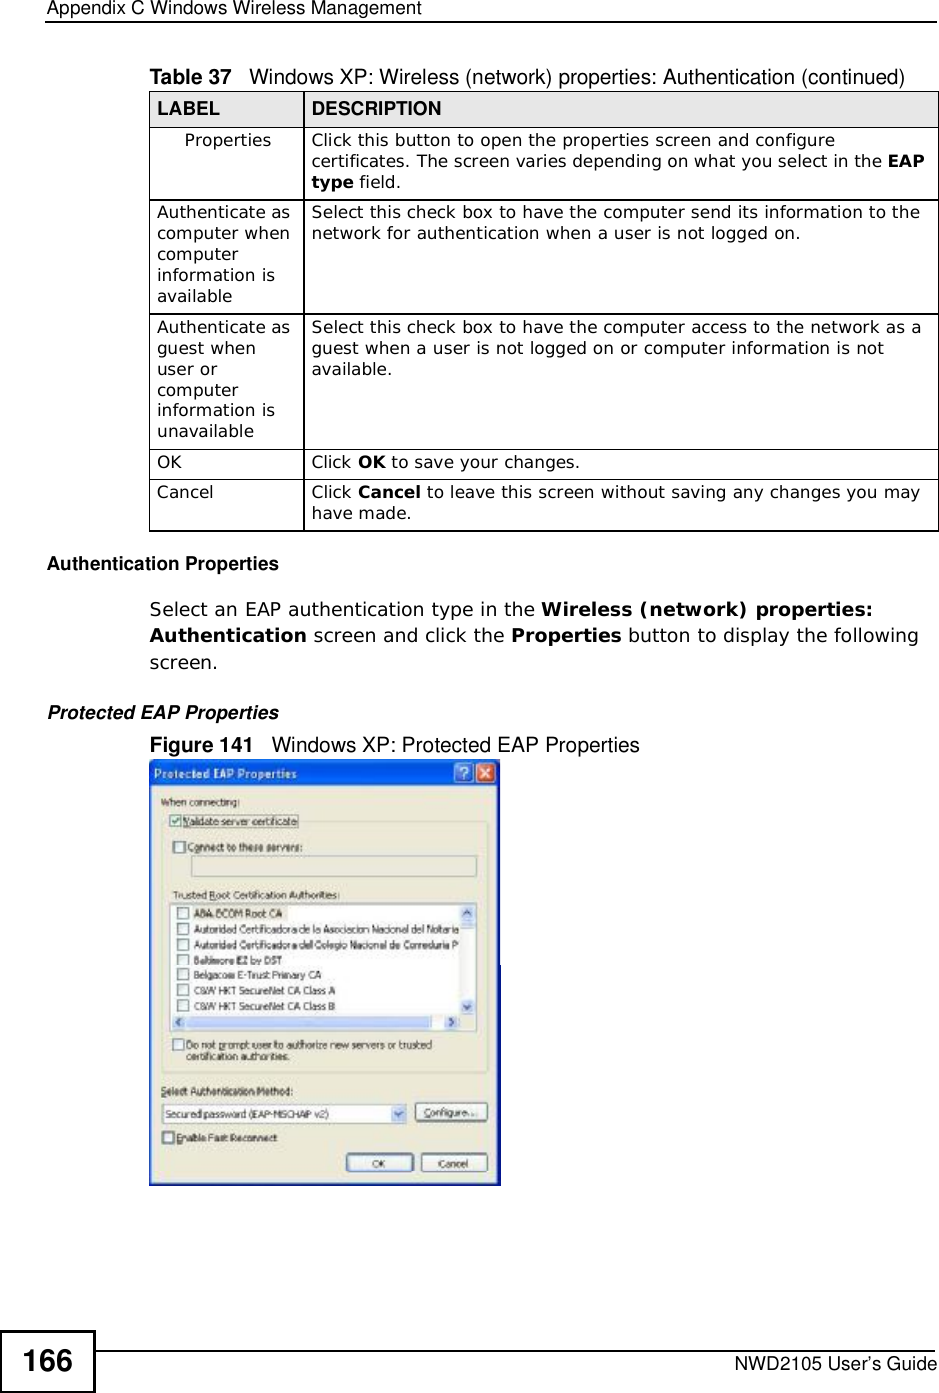 Appendix CWindows Wireless ManagementNWD2105 User’s Guide166Authentication PropertiesSelect an EAP authentication type in the Wireless (network) properties: Authentication screen and click the Properties button to display the following screen. Protected EAP PropertiesFigure 141   Windows XP: Protected EAP PropertiesPropertiesClick this button to open the properties screen and configure certificates. The screen varies depending on what you select in the EAPtype field.Authenticate as computer when computer information is availableSelect this check box to have the computer send its information to the network for authentication when a user is not logged on.Authenticate as guest when user or computer information is unavailableSelect this check box to have the computer access to the network as a guest when a user is not logged on or computer information is not available.OKClick OK to save your changes.CancelClick Cancel to leave this screen without saving any changes you may have made.Table 37   Windows XP: Wireless (network) properties: Authentication (continued)LABEL DESCRIPTION